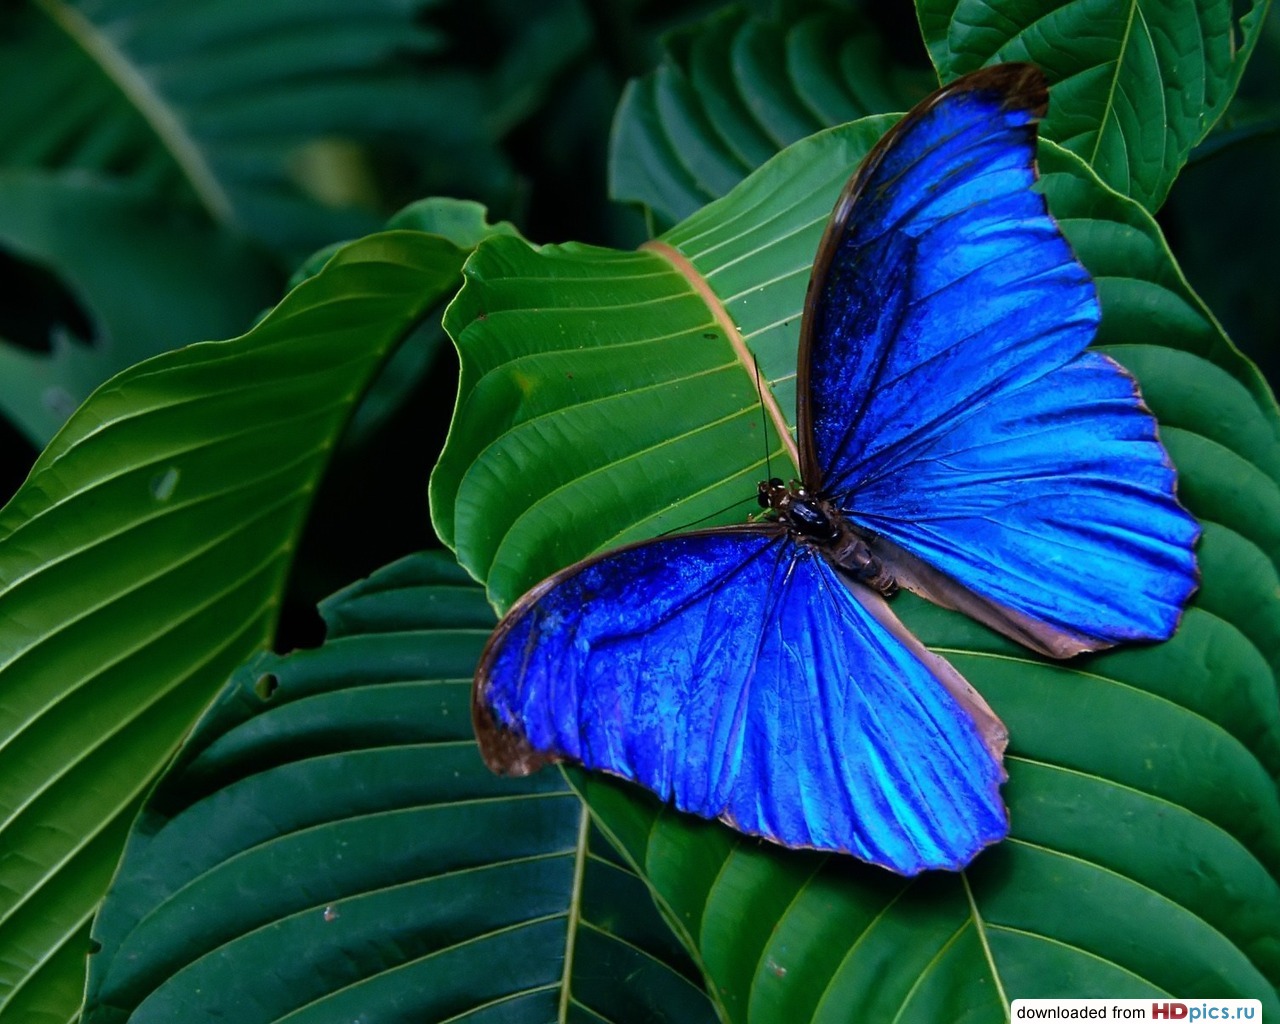  blue butterfly sits on green , download photo